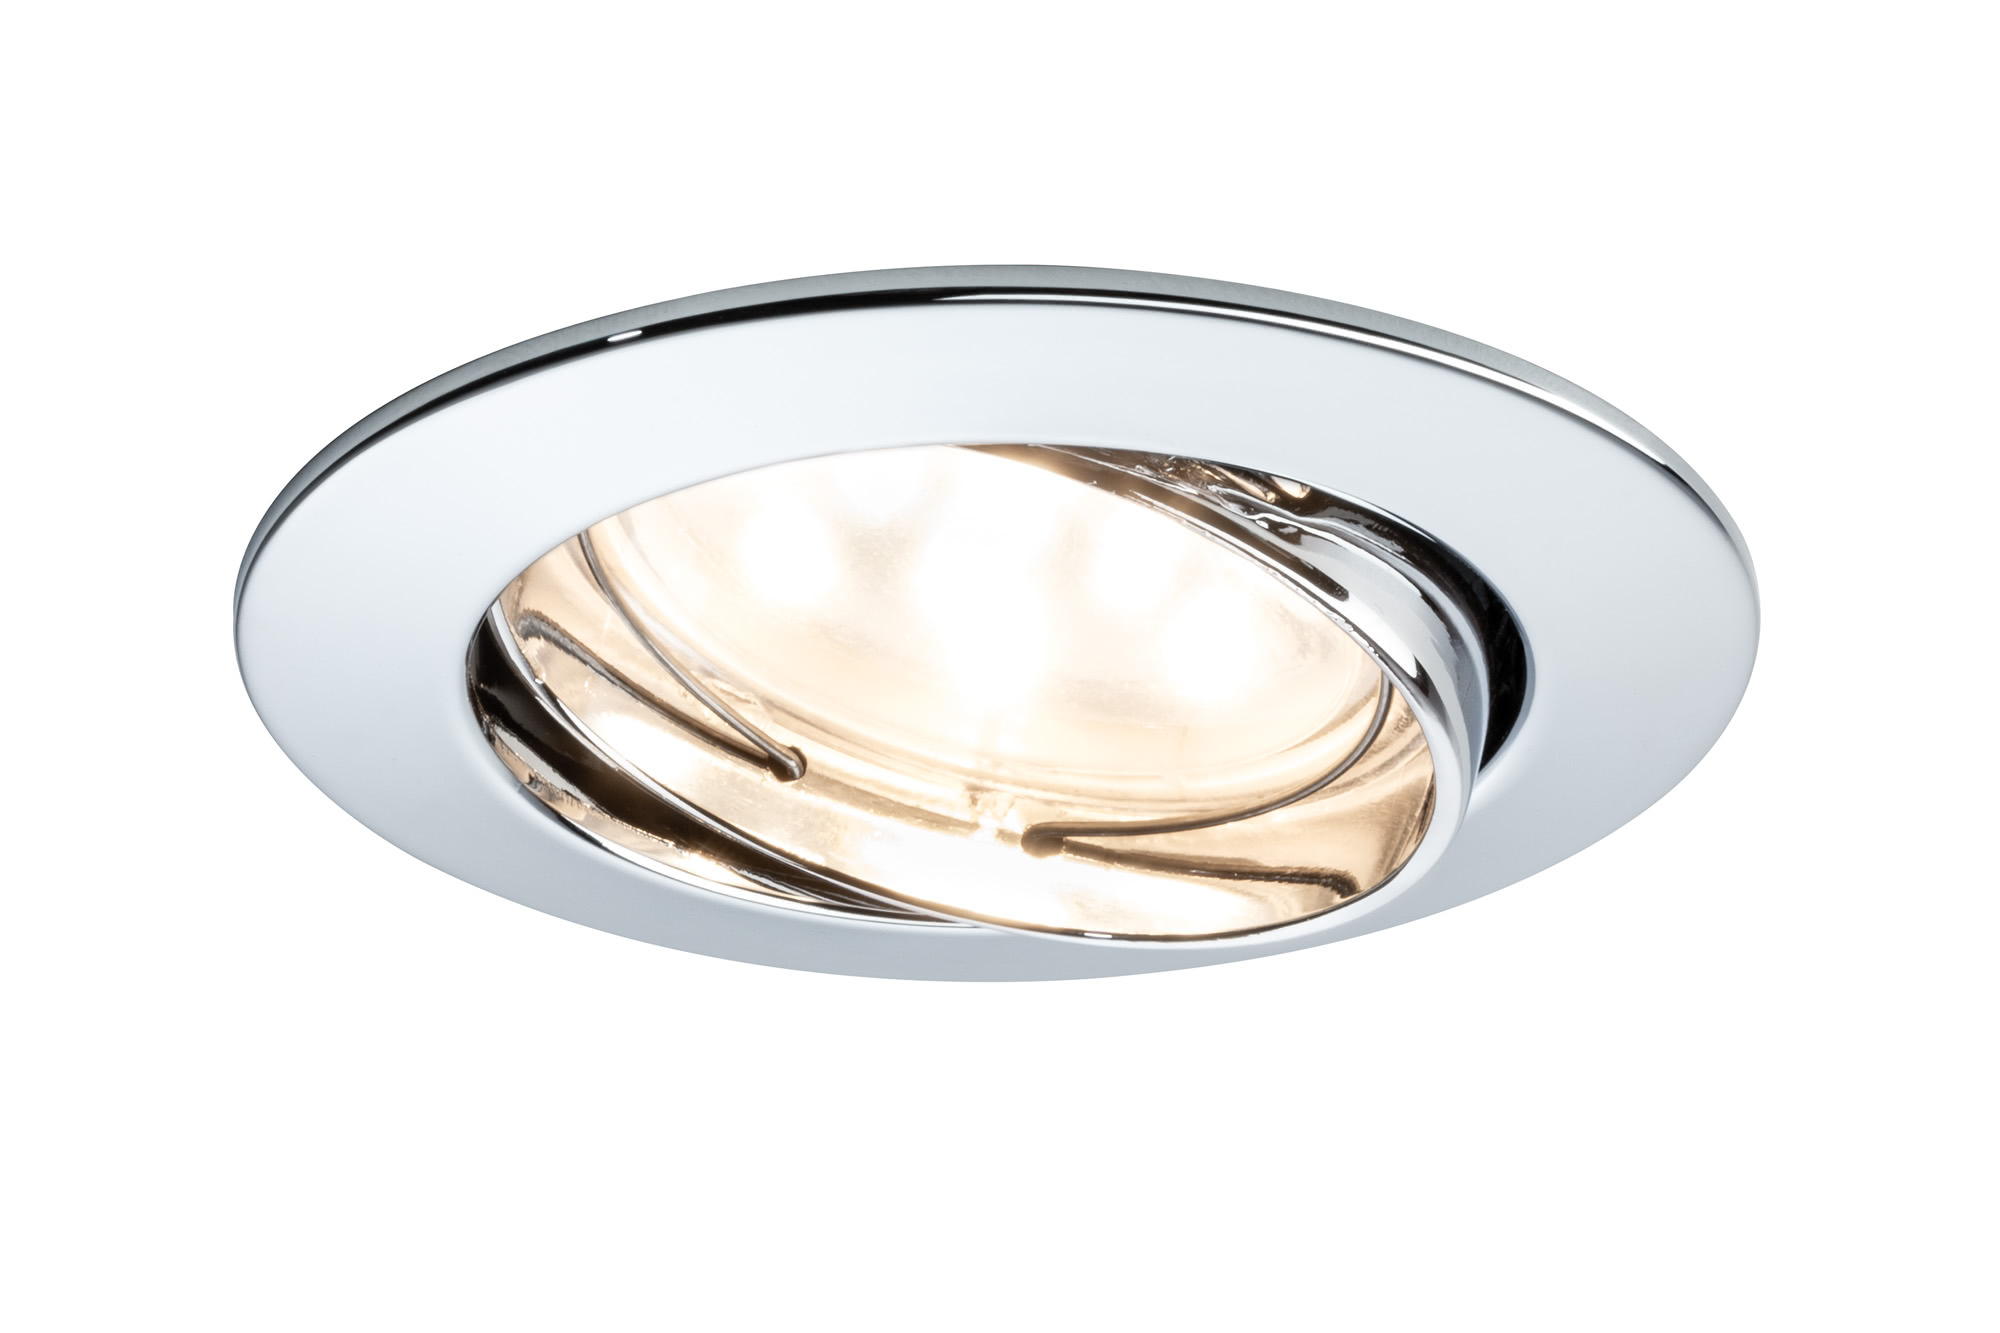 92770 EBL Coin LED 3x6,5W 51mm rund schw Chrom The Coins are innovative and user-friendly recessed spotlights that are suitable for new installations as well as replacing existing installations. Since they are exceptionally flat, they can be installed in ceilings with a cavity of only 30 to 35В millimetres. From 50В centimetres to 5В metres or more вЂ“ you determine the spacing between the lights! The simple and tool-free linking of single luminaires using quick clips save more than just time and stress вЂ“ thanks to energy-efficient LED technology with very lower power consumption, the Coins are also easy on the wallet. 927.70 Paulmann